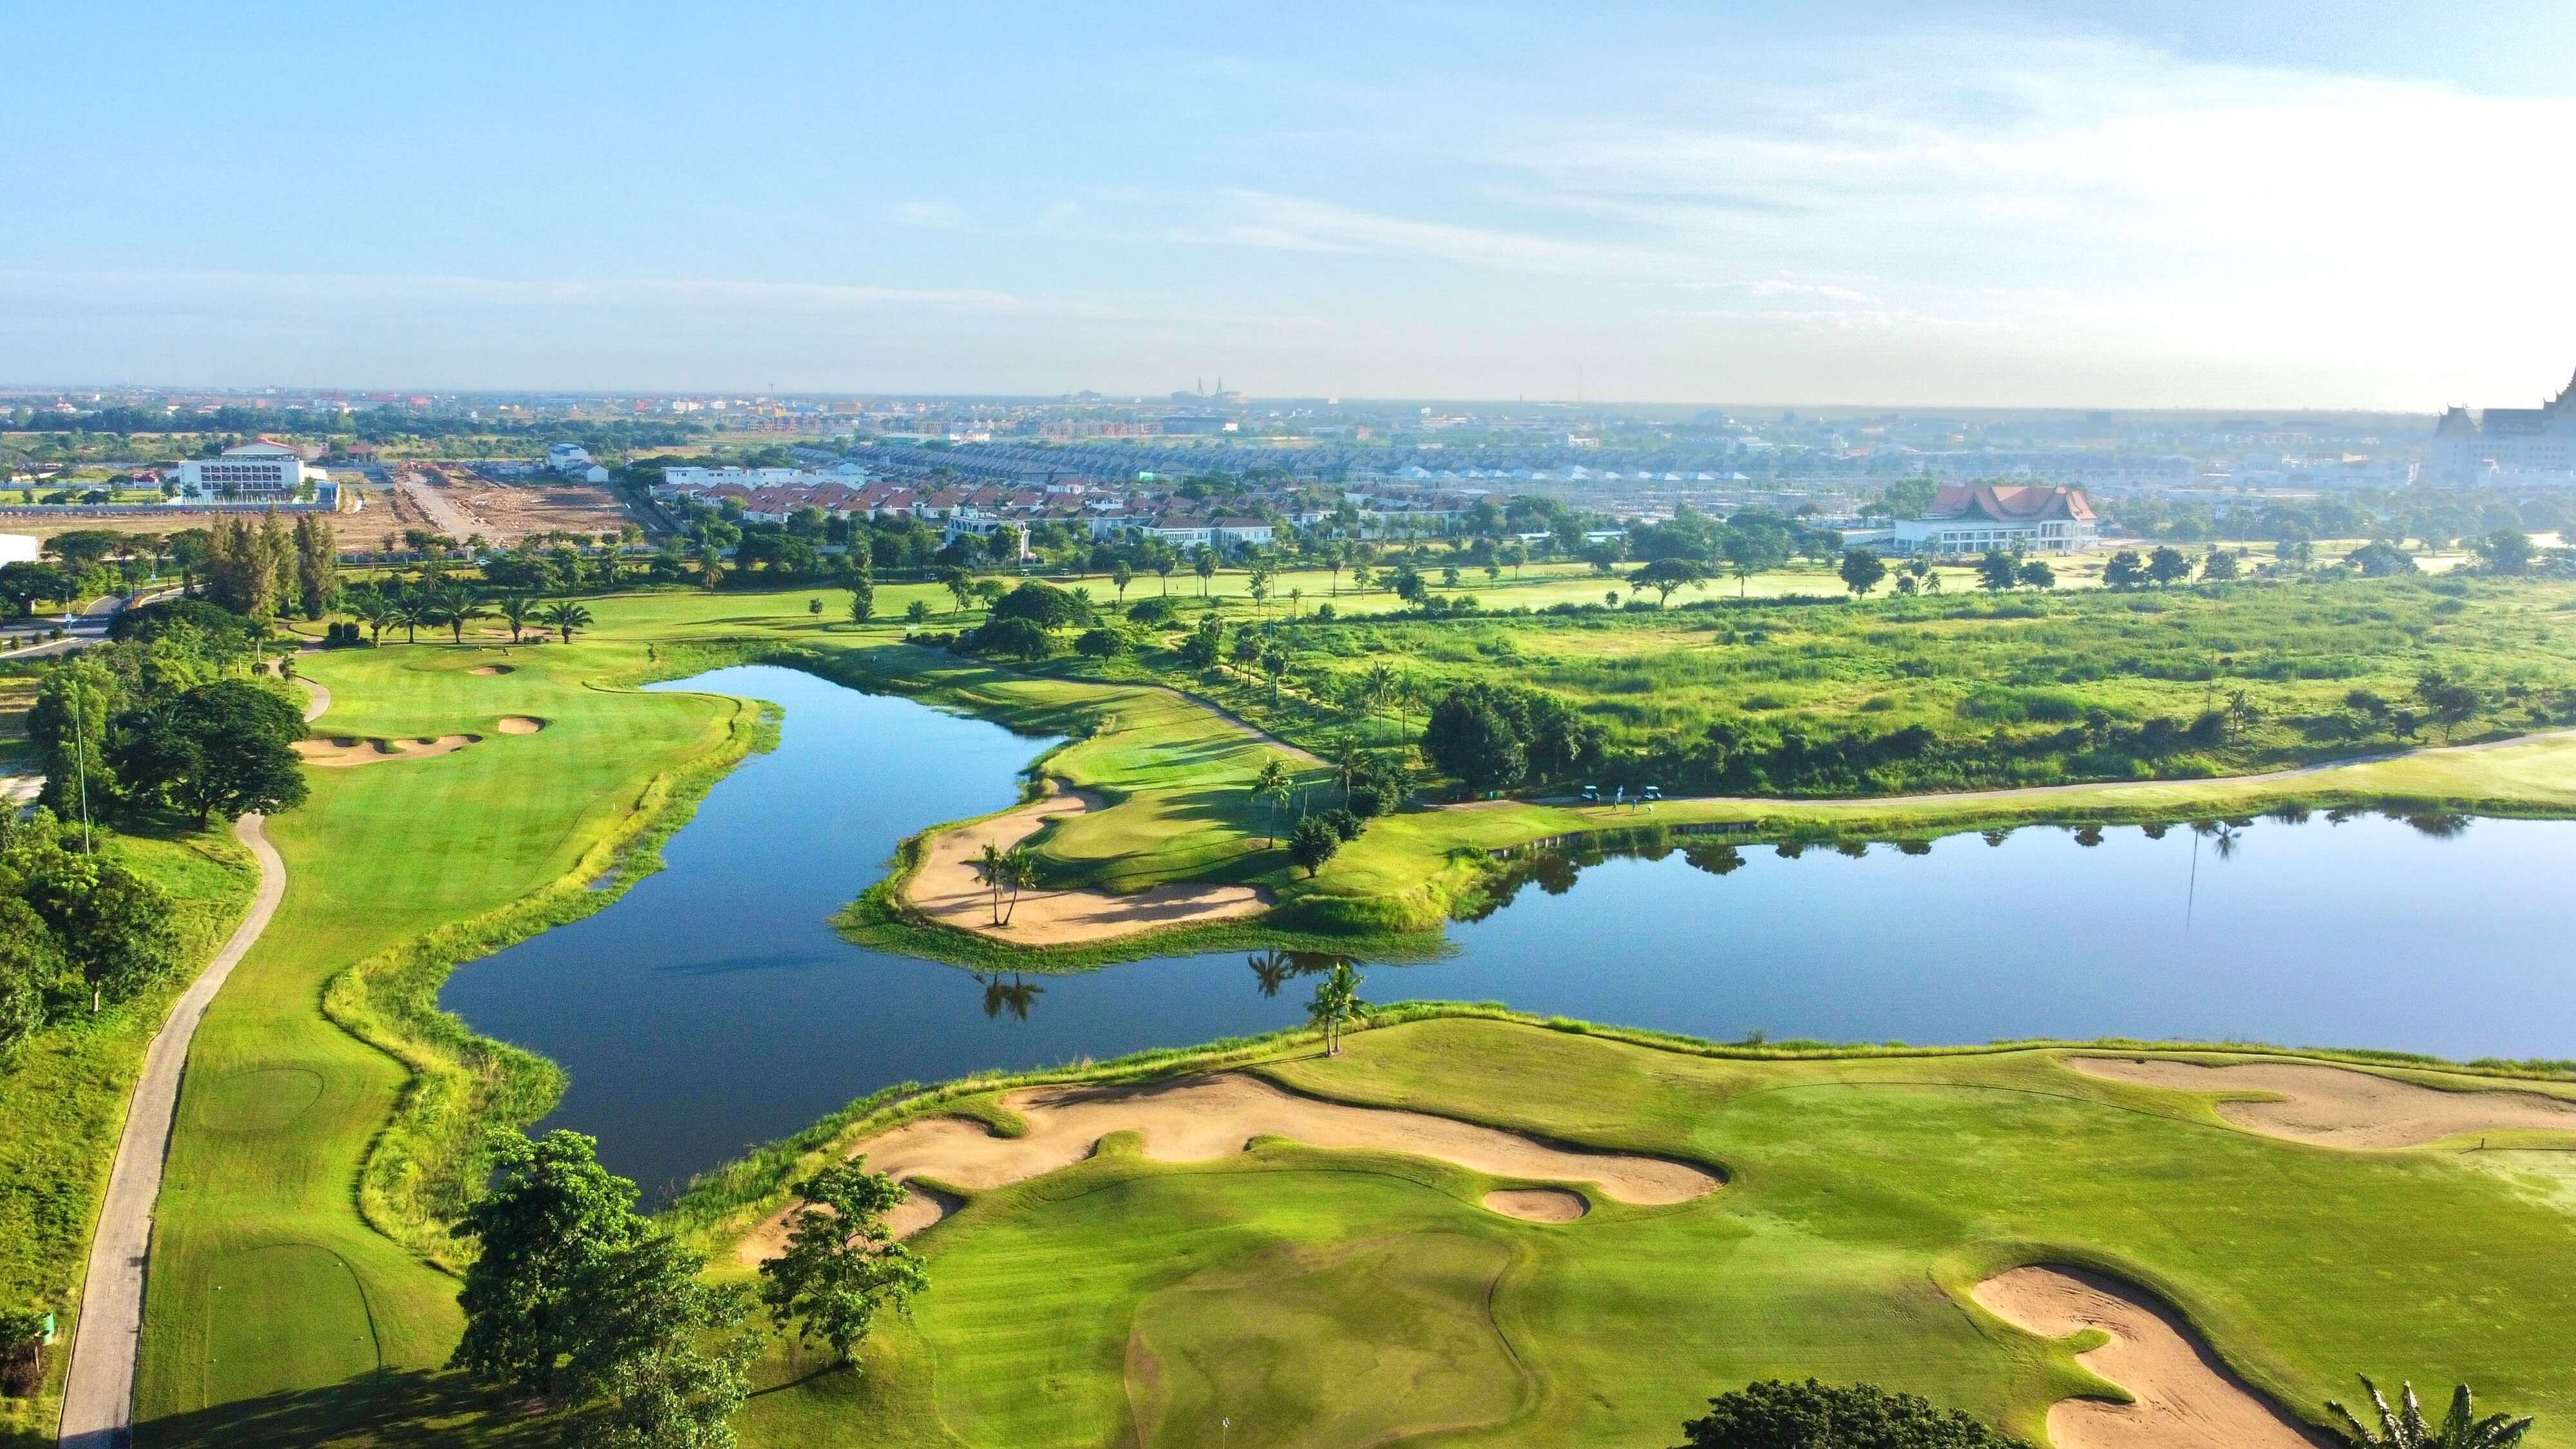 CHAMPIONSHIP GOLF IN THE HEART OF CAMBODIA